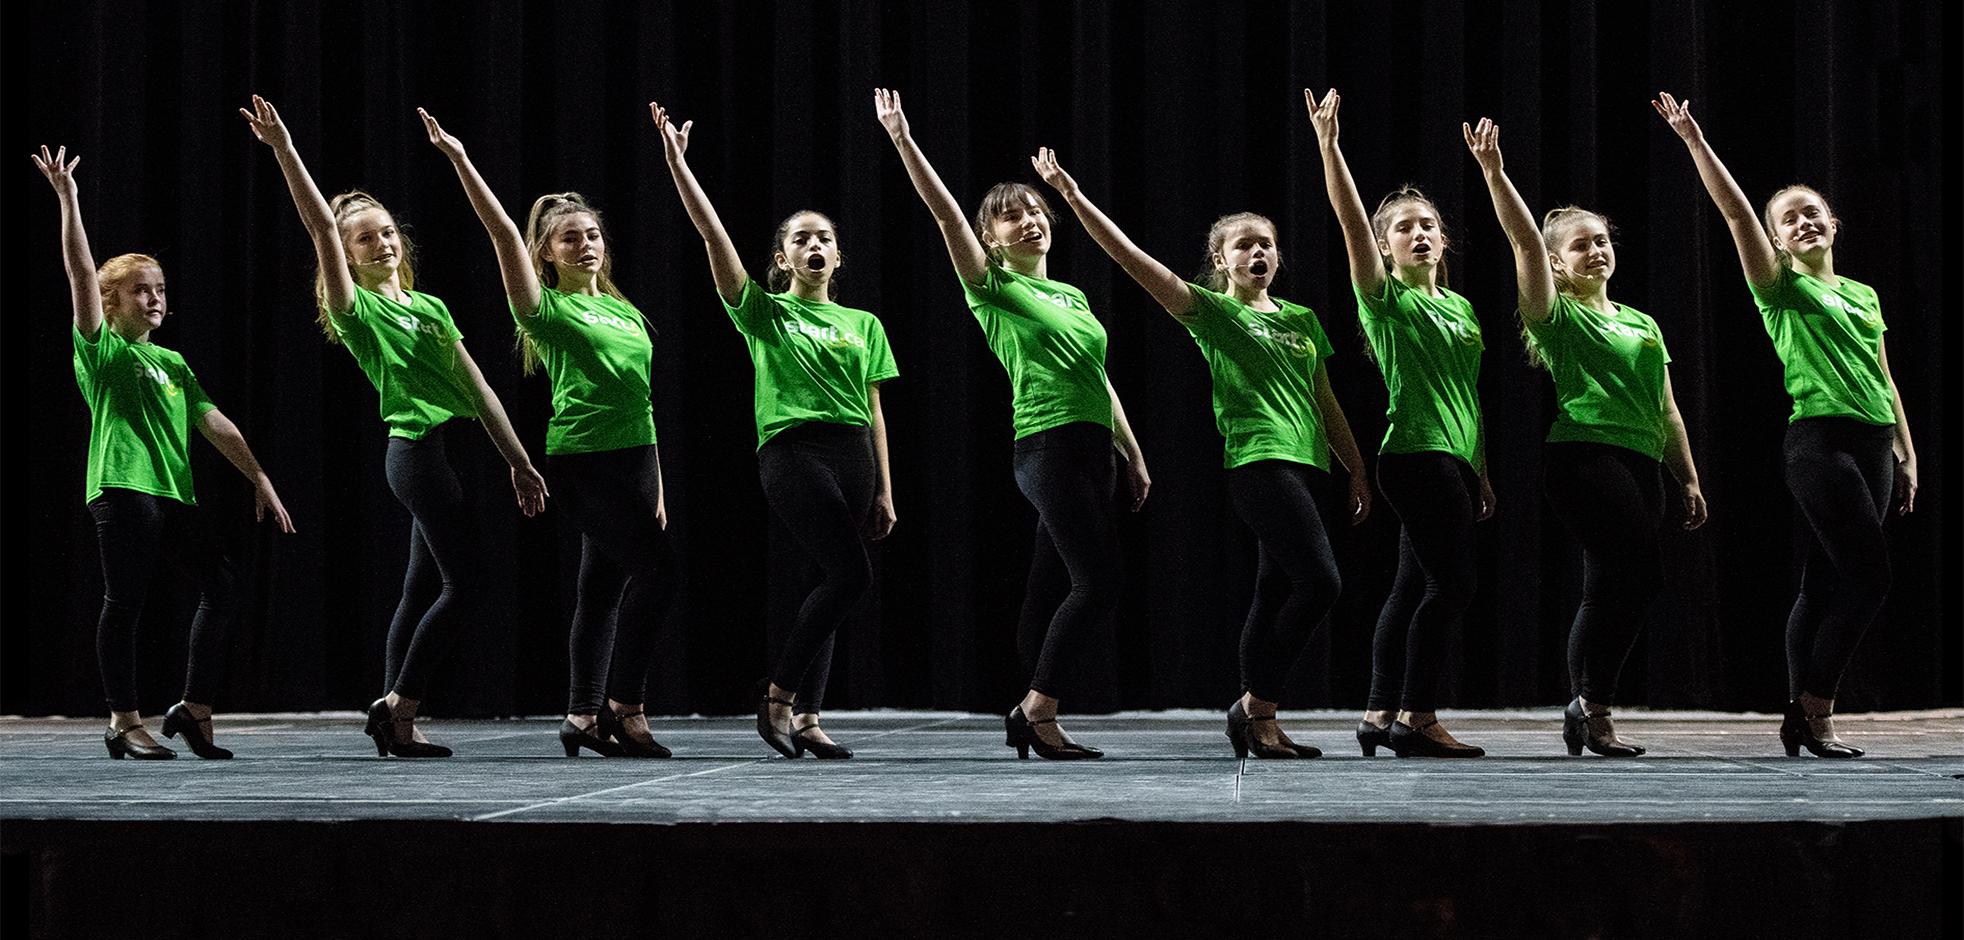 Young girls performing a dance on stage at Budweiser Gardens in London, Ontario